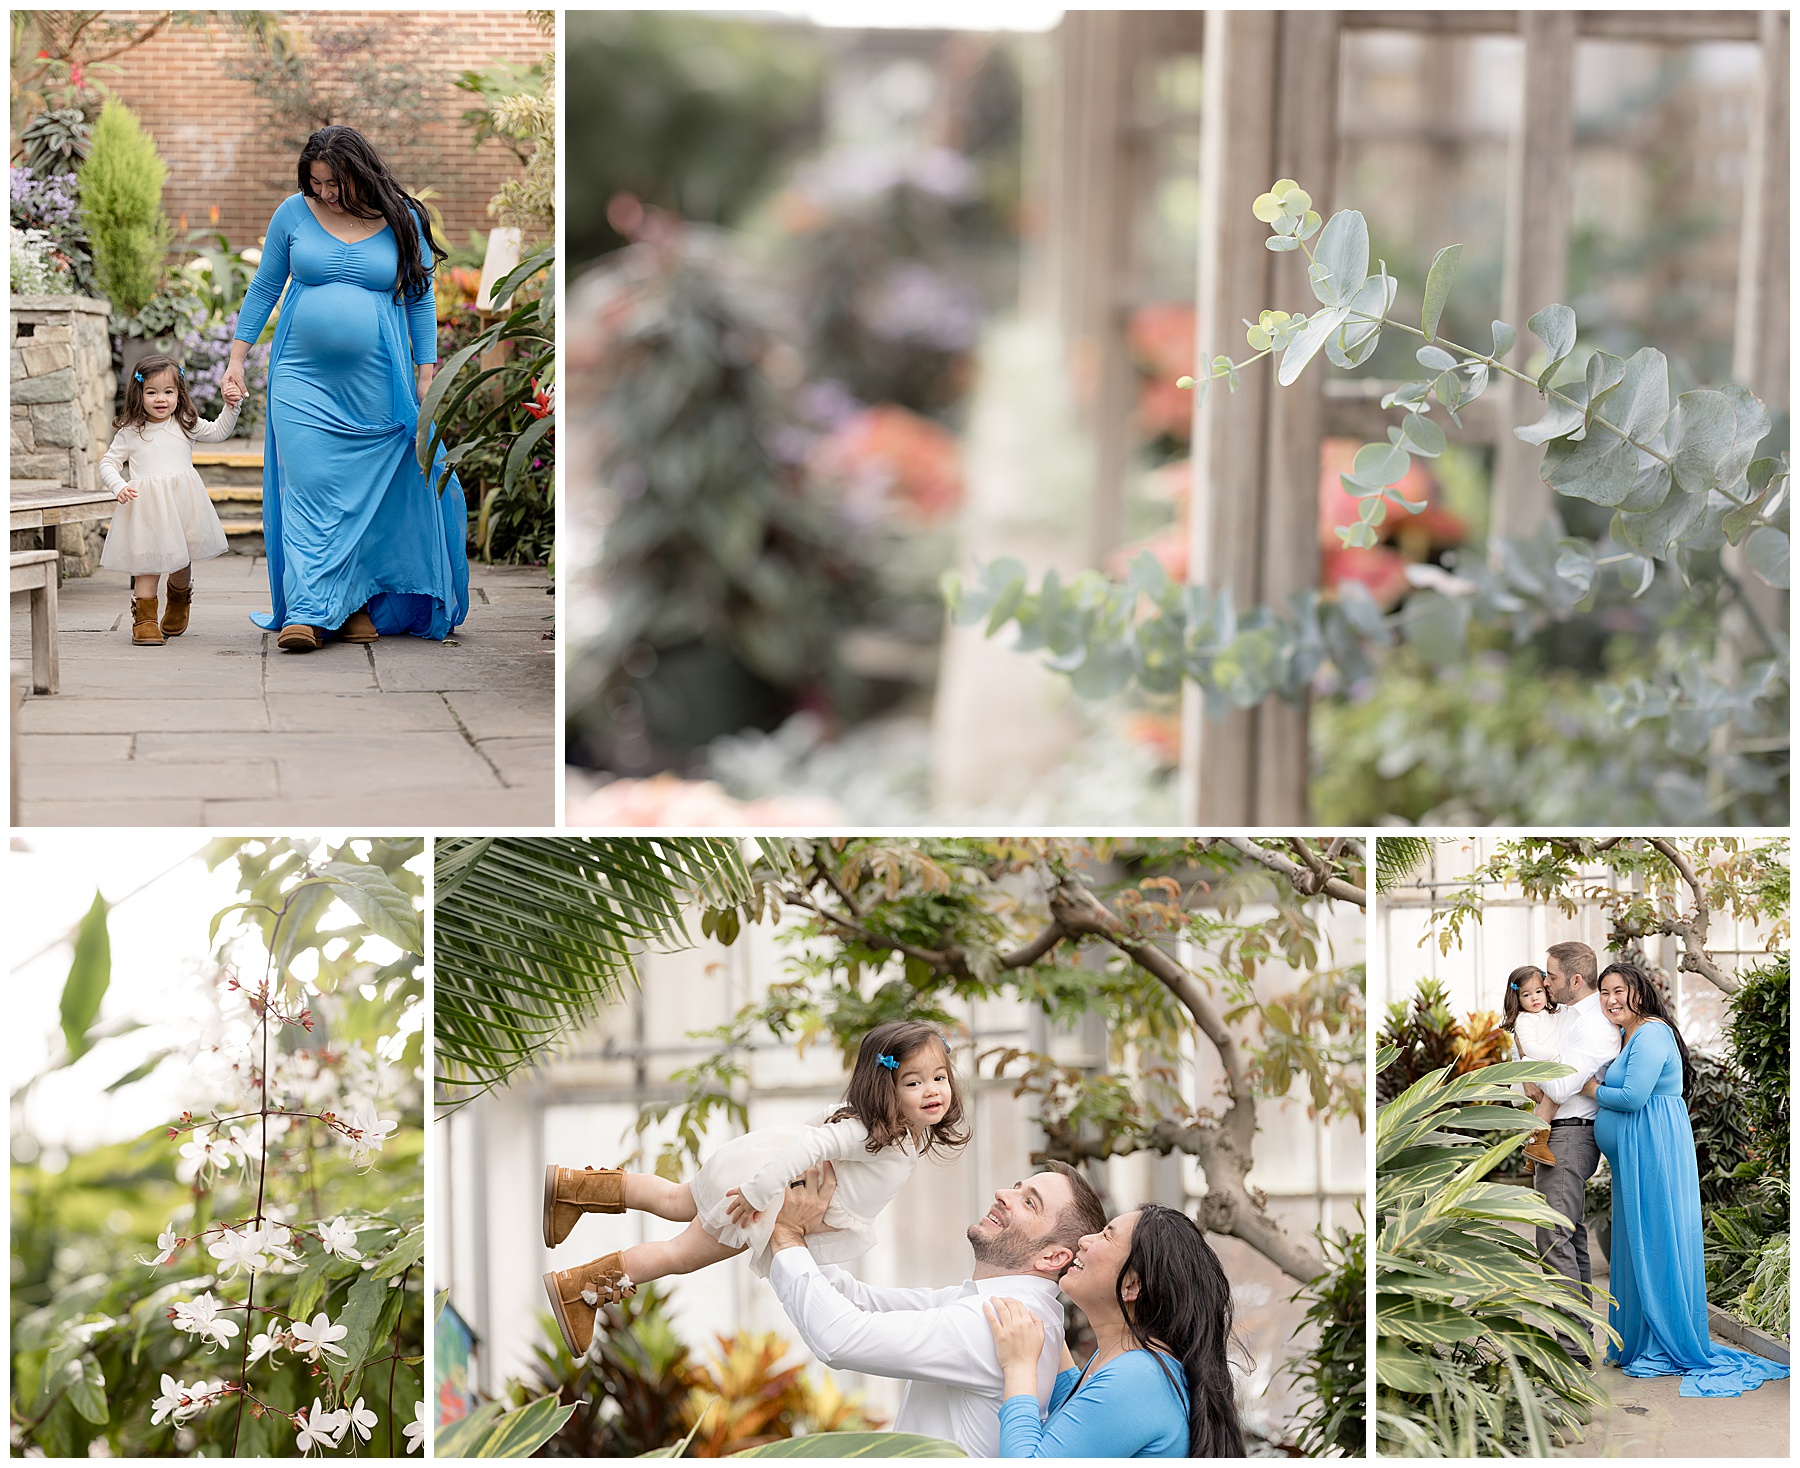 Maternity photos at the Brookside Conservatory to capture the beauty of pregnancy.